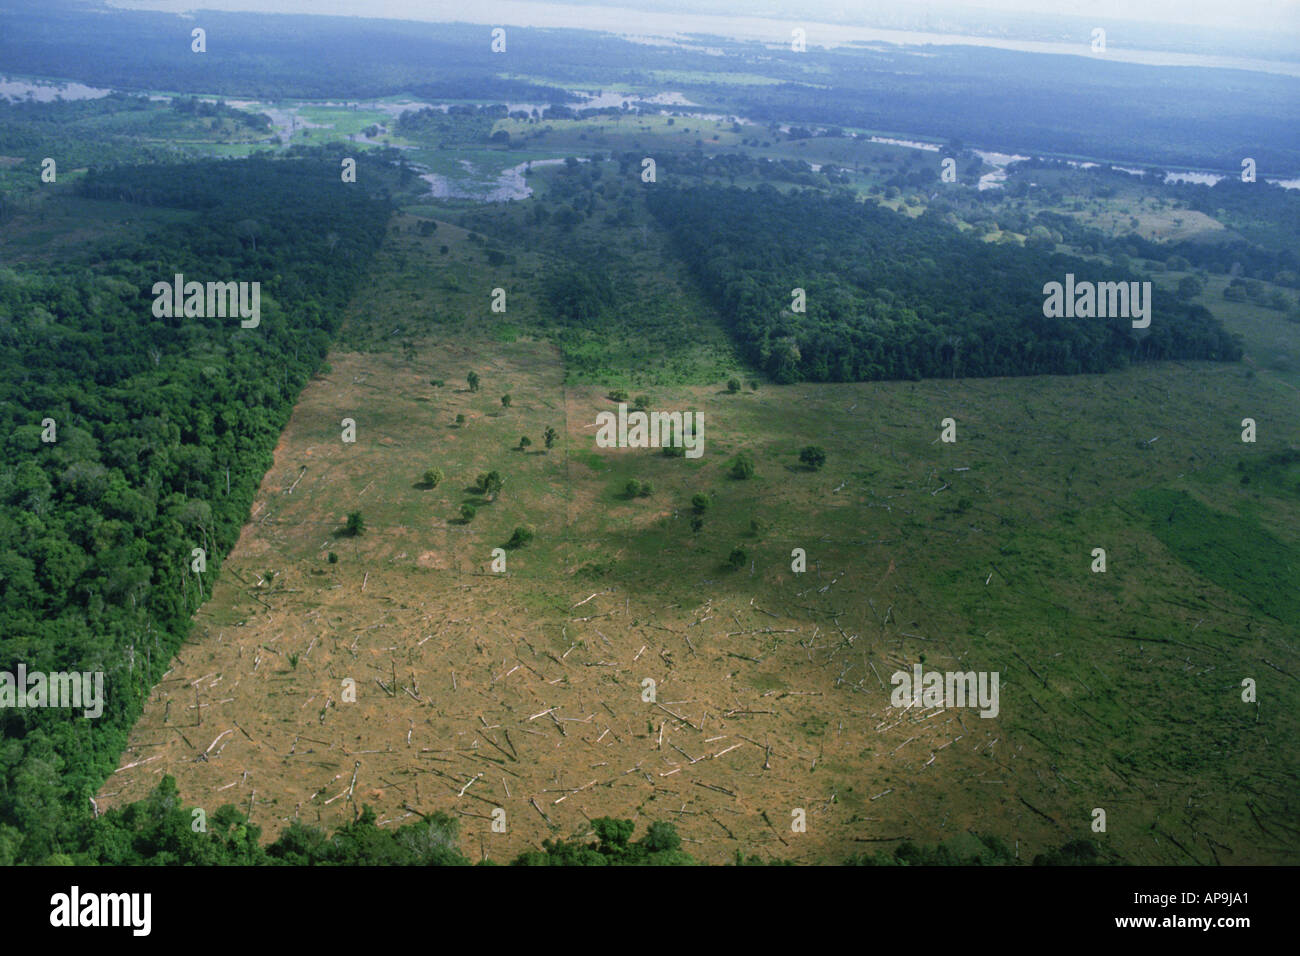 Aerial view of deforestation of rain forests in Brazil near Amazon River Stock Photo